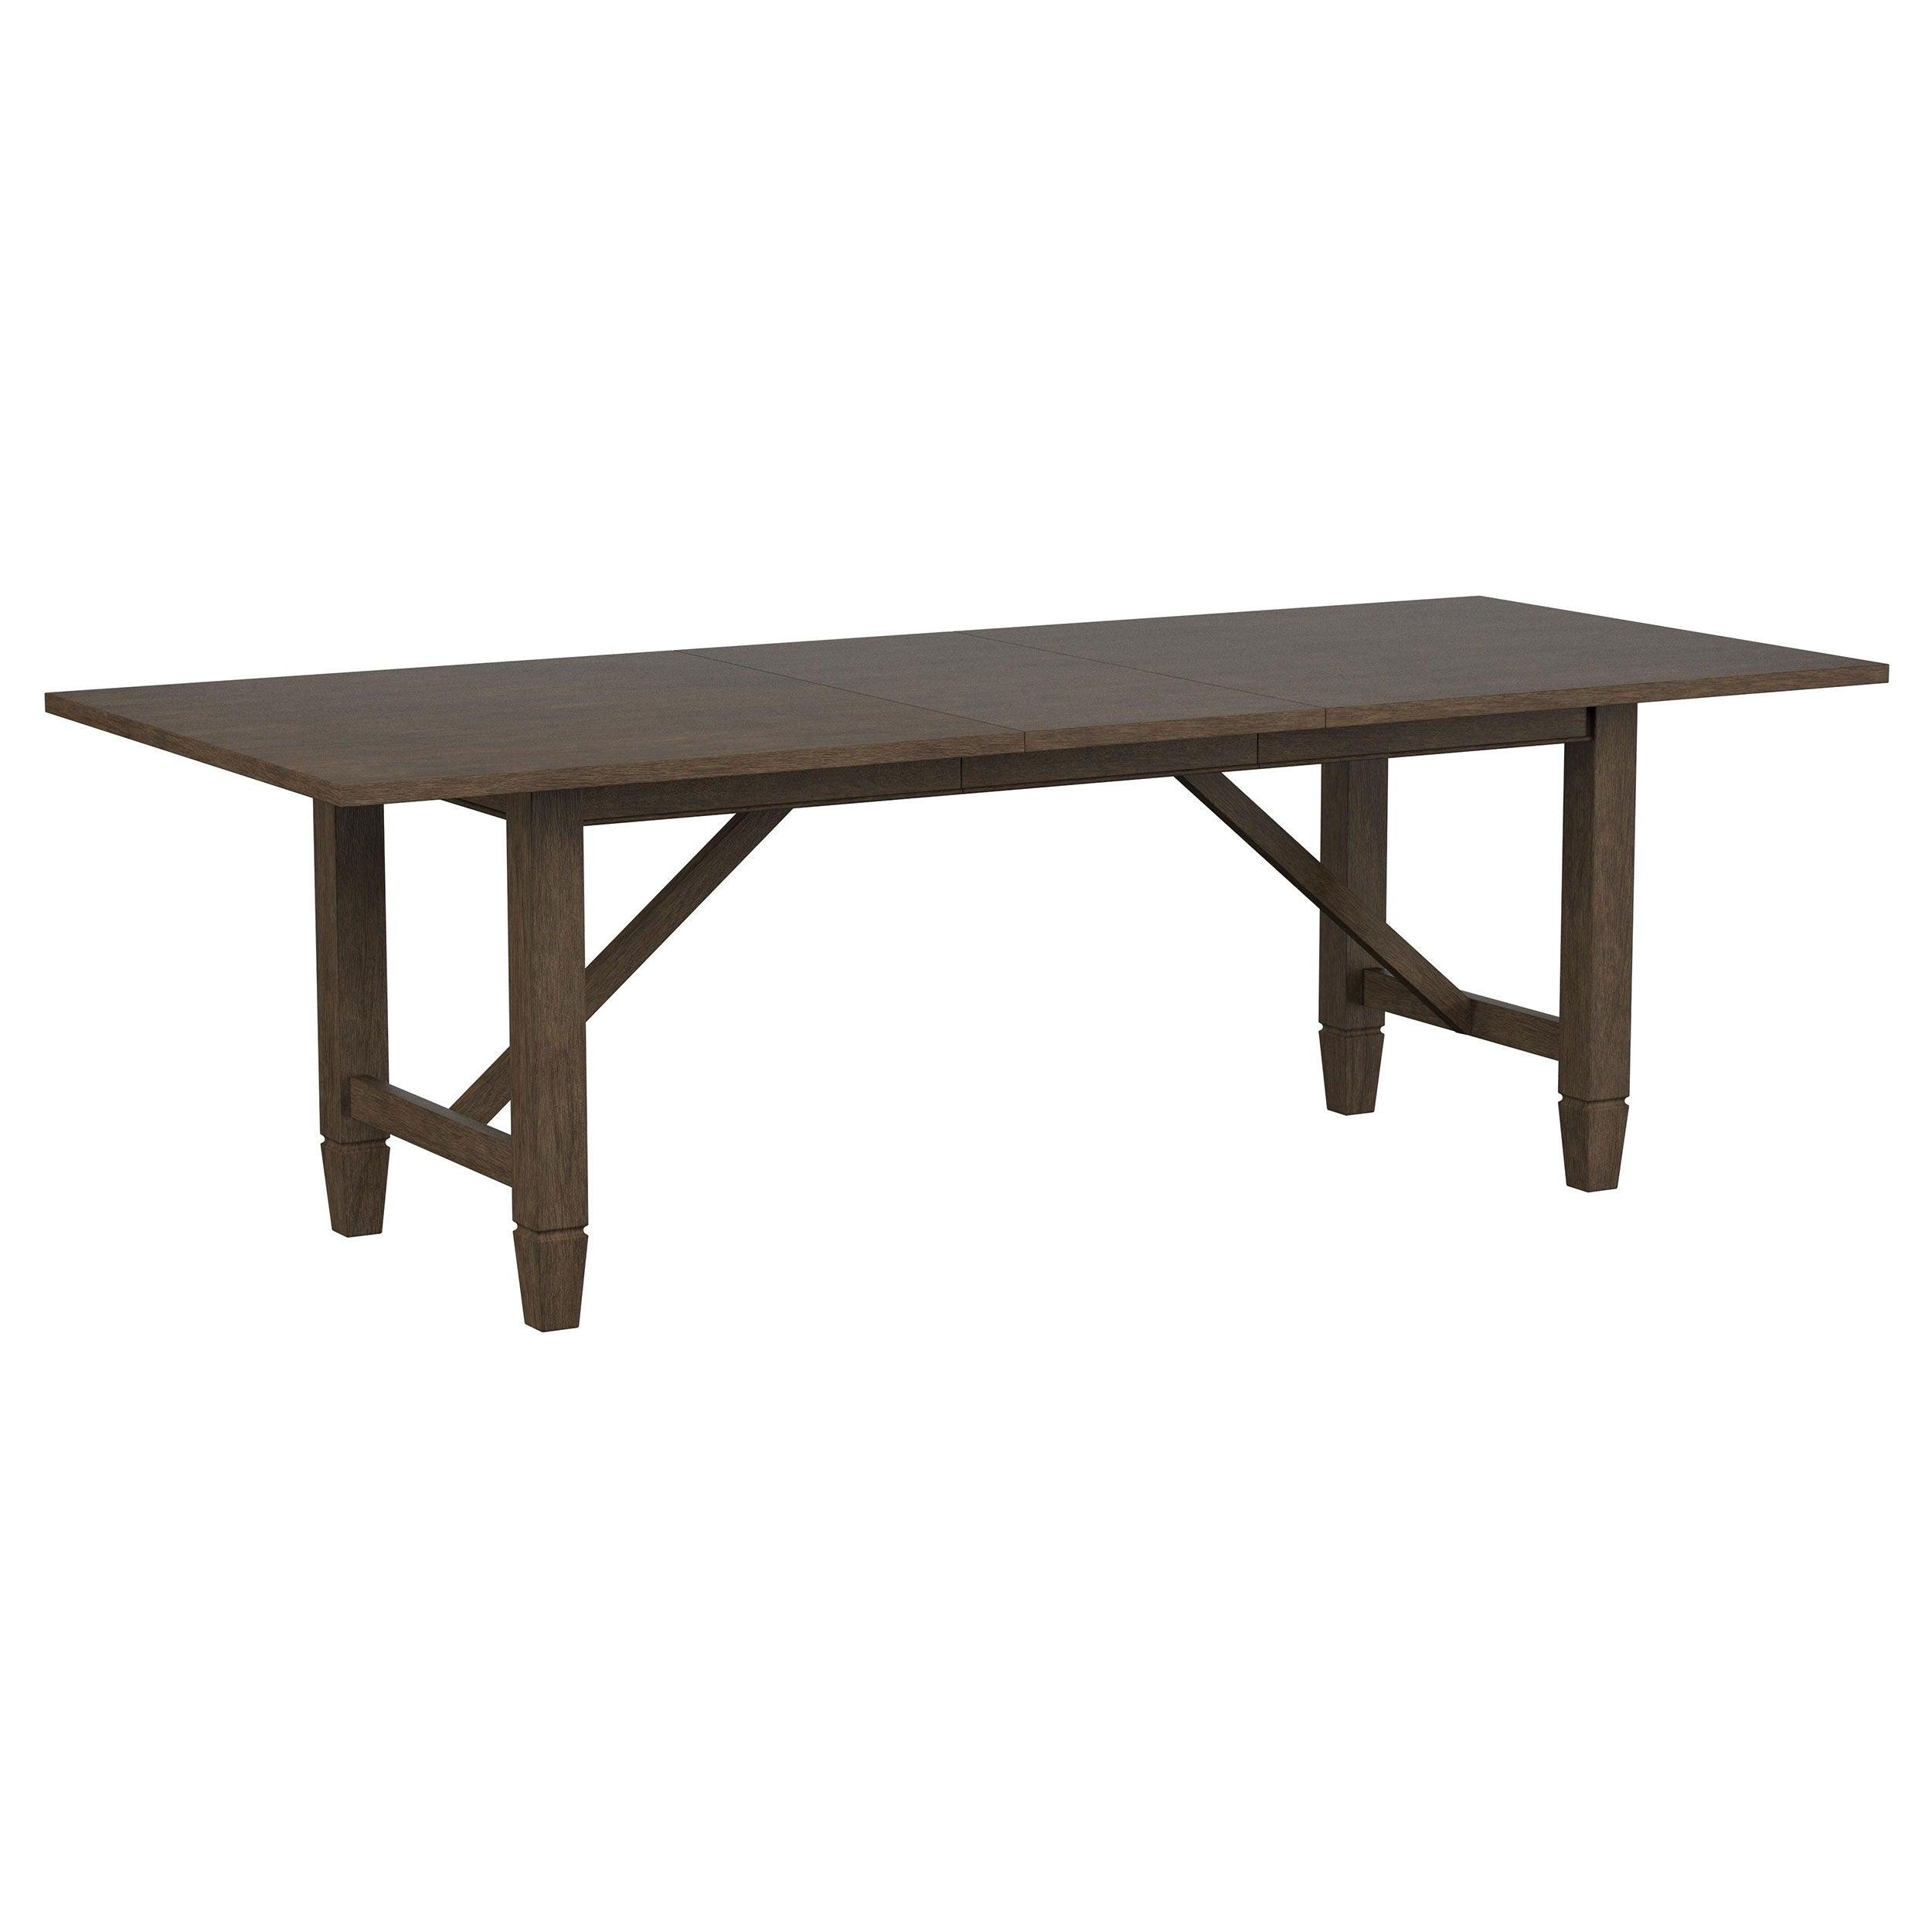 Coaster Fine Furniture - Matisse - Rectangular Dining Table With Removable Extension Leaf - Brown - 5th Avenue Furniture